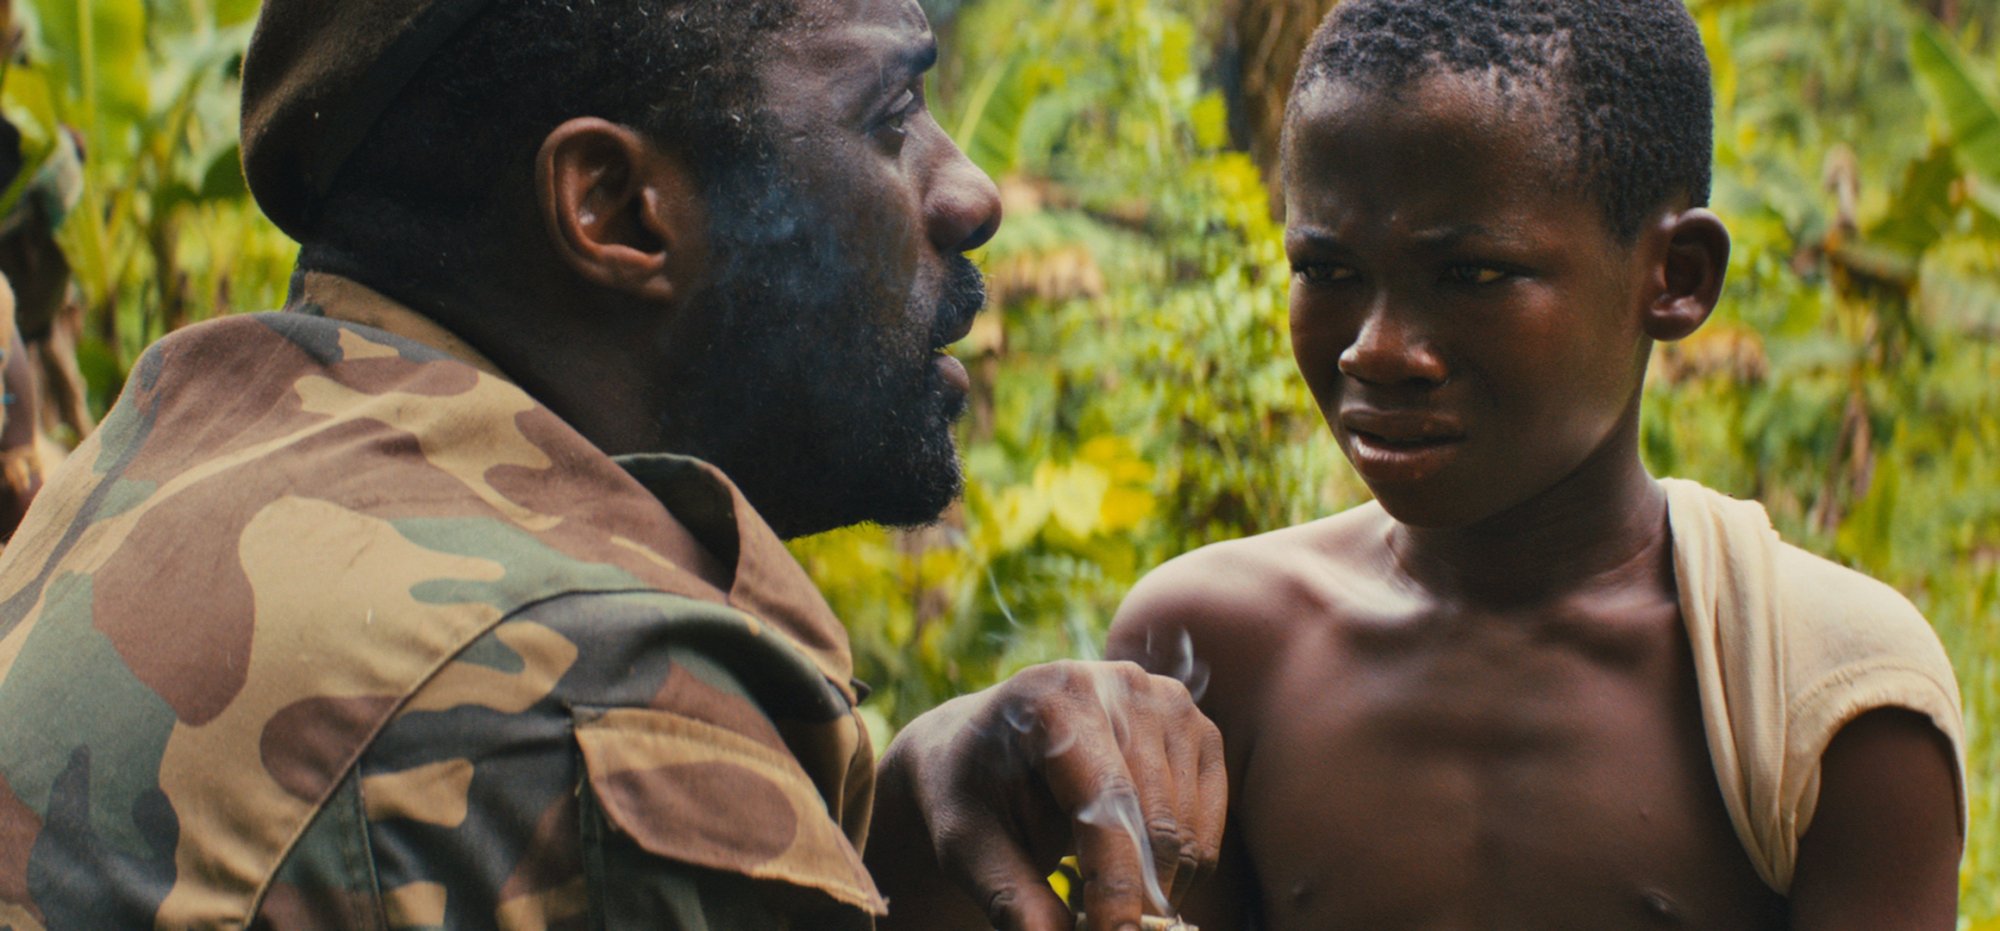 Closeup of an adult man in military fatigues and a small child; still from "Beasts of No Nation."